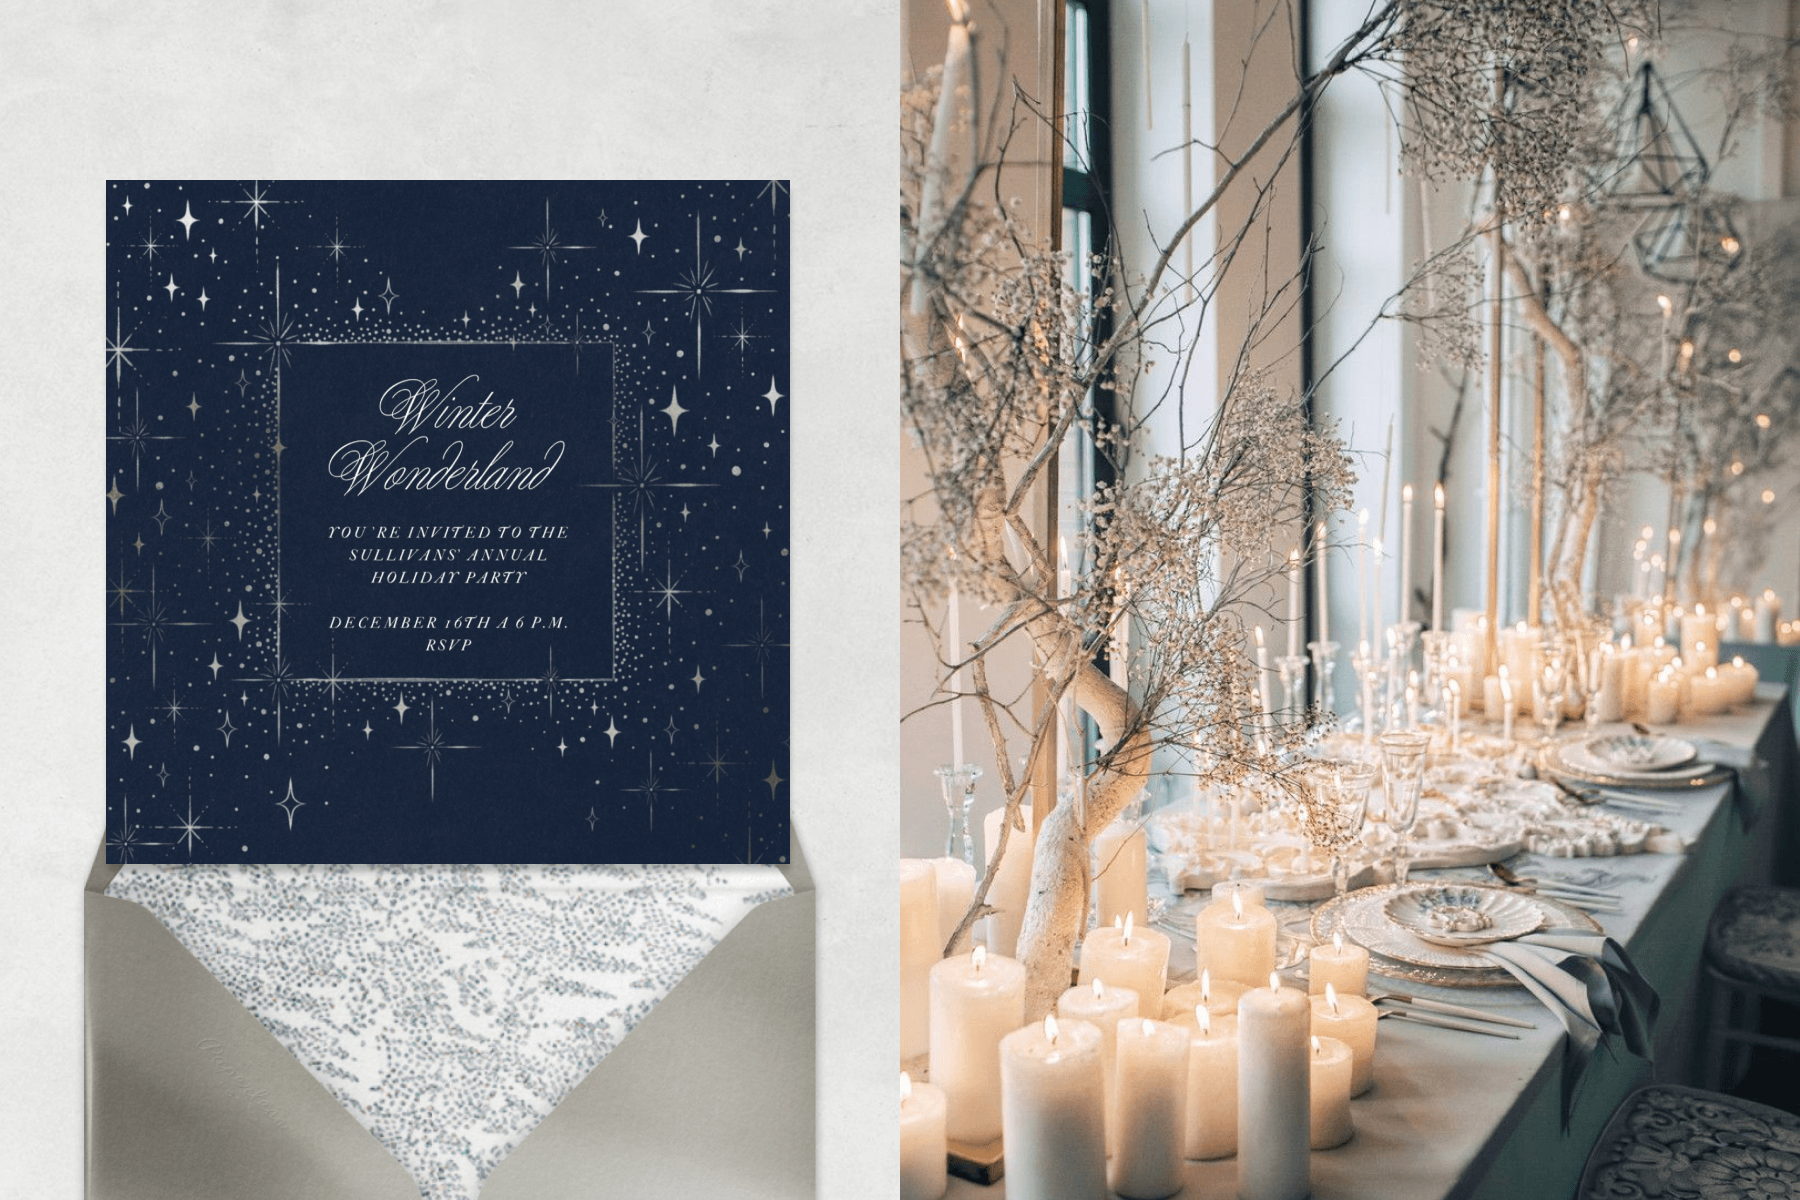 A navy invitation has twinkling silver stars around the border; a winter forest-themed banquet table with white pillar candles and white tree branches.